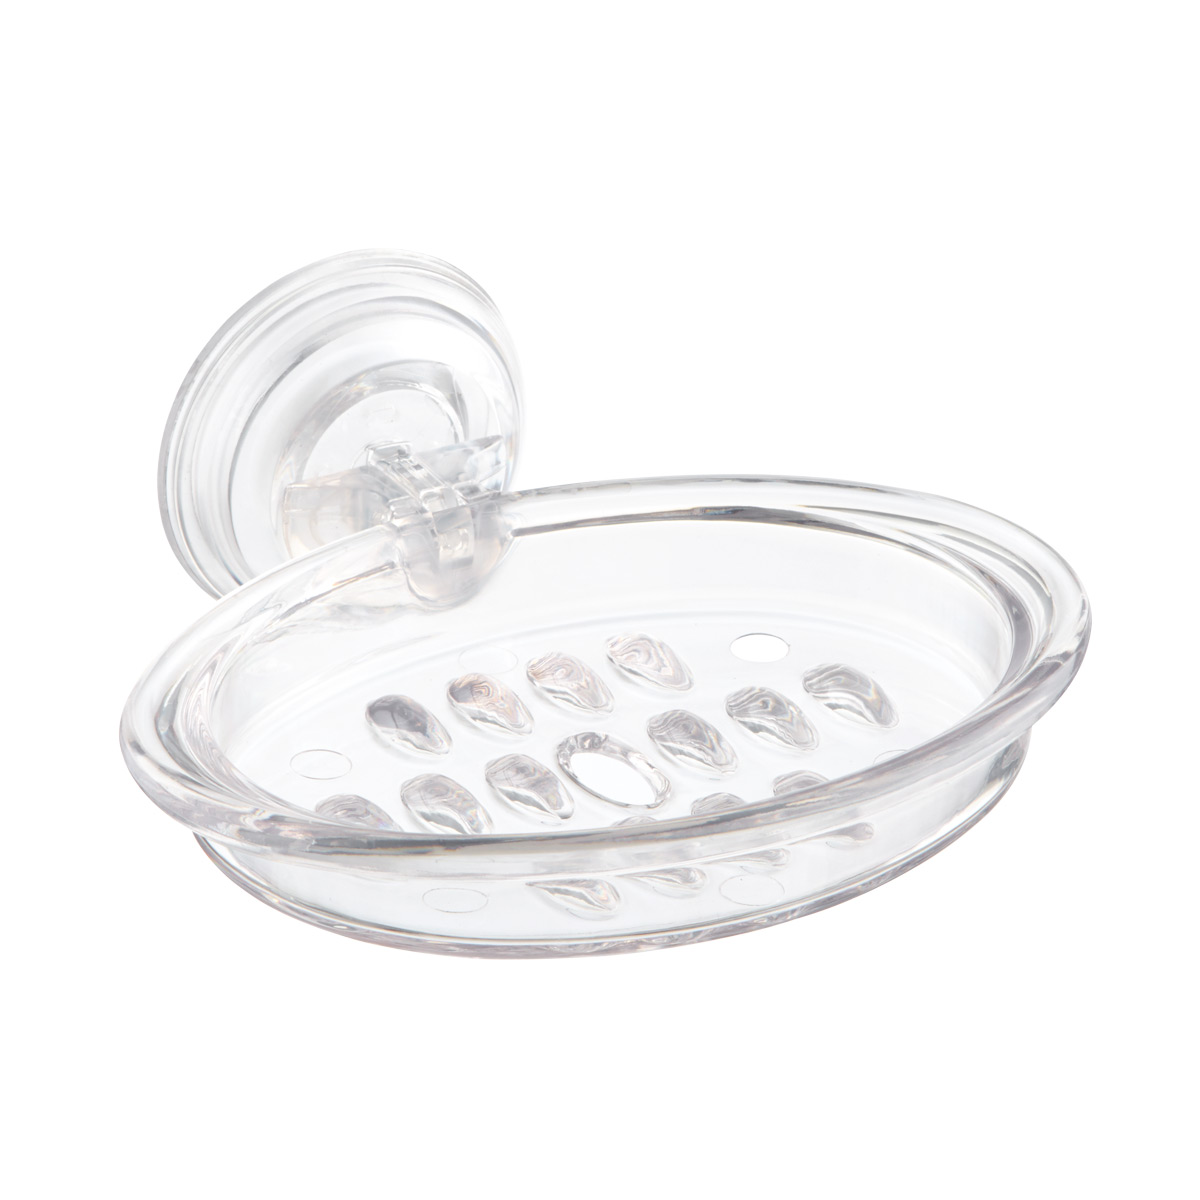 https://www.containerstore.com/catalogimages/327371/10029060-suction-soap-dish-v2.jpg